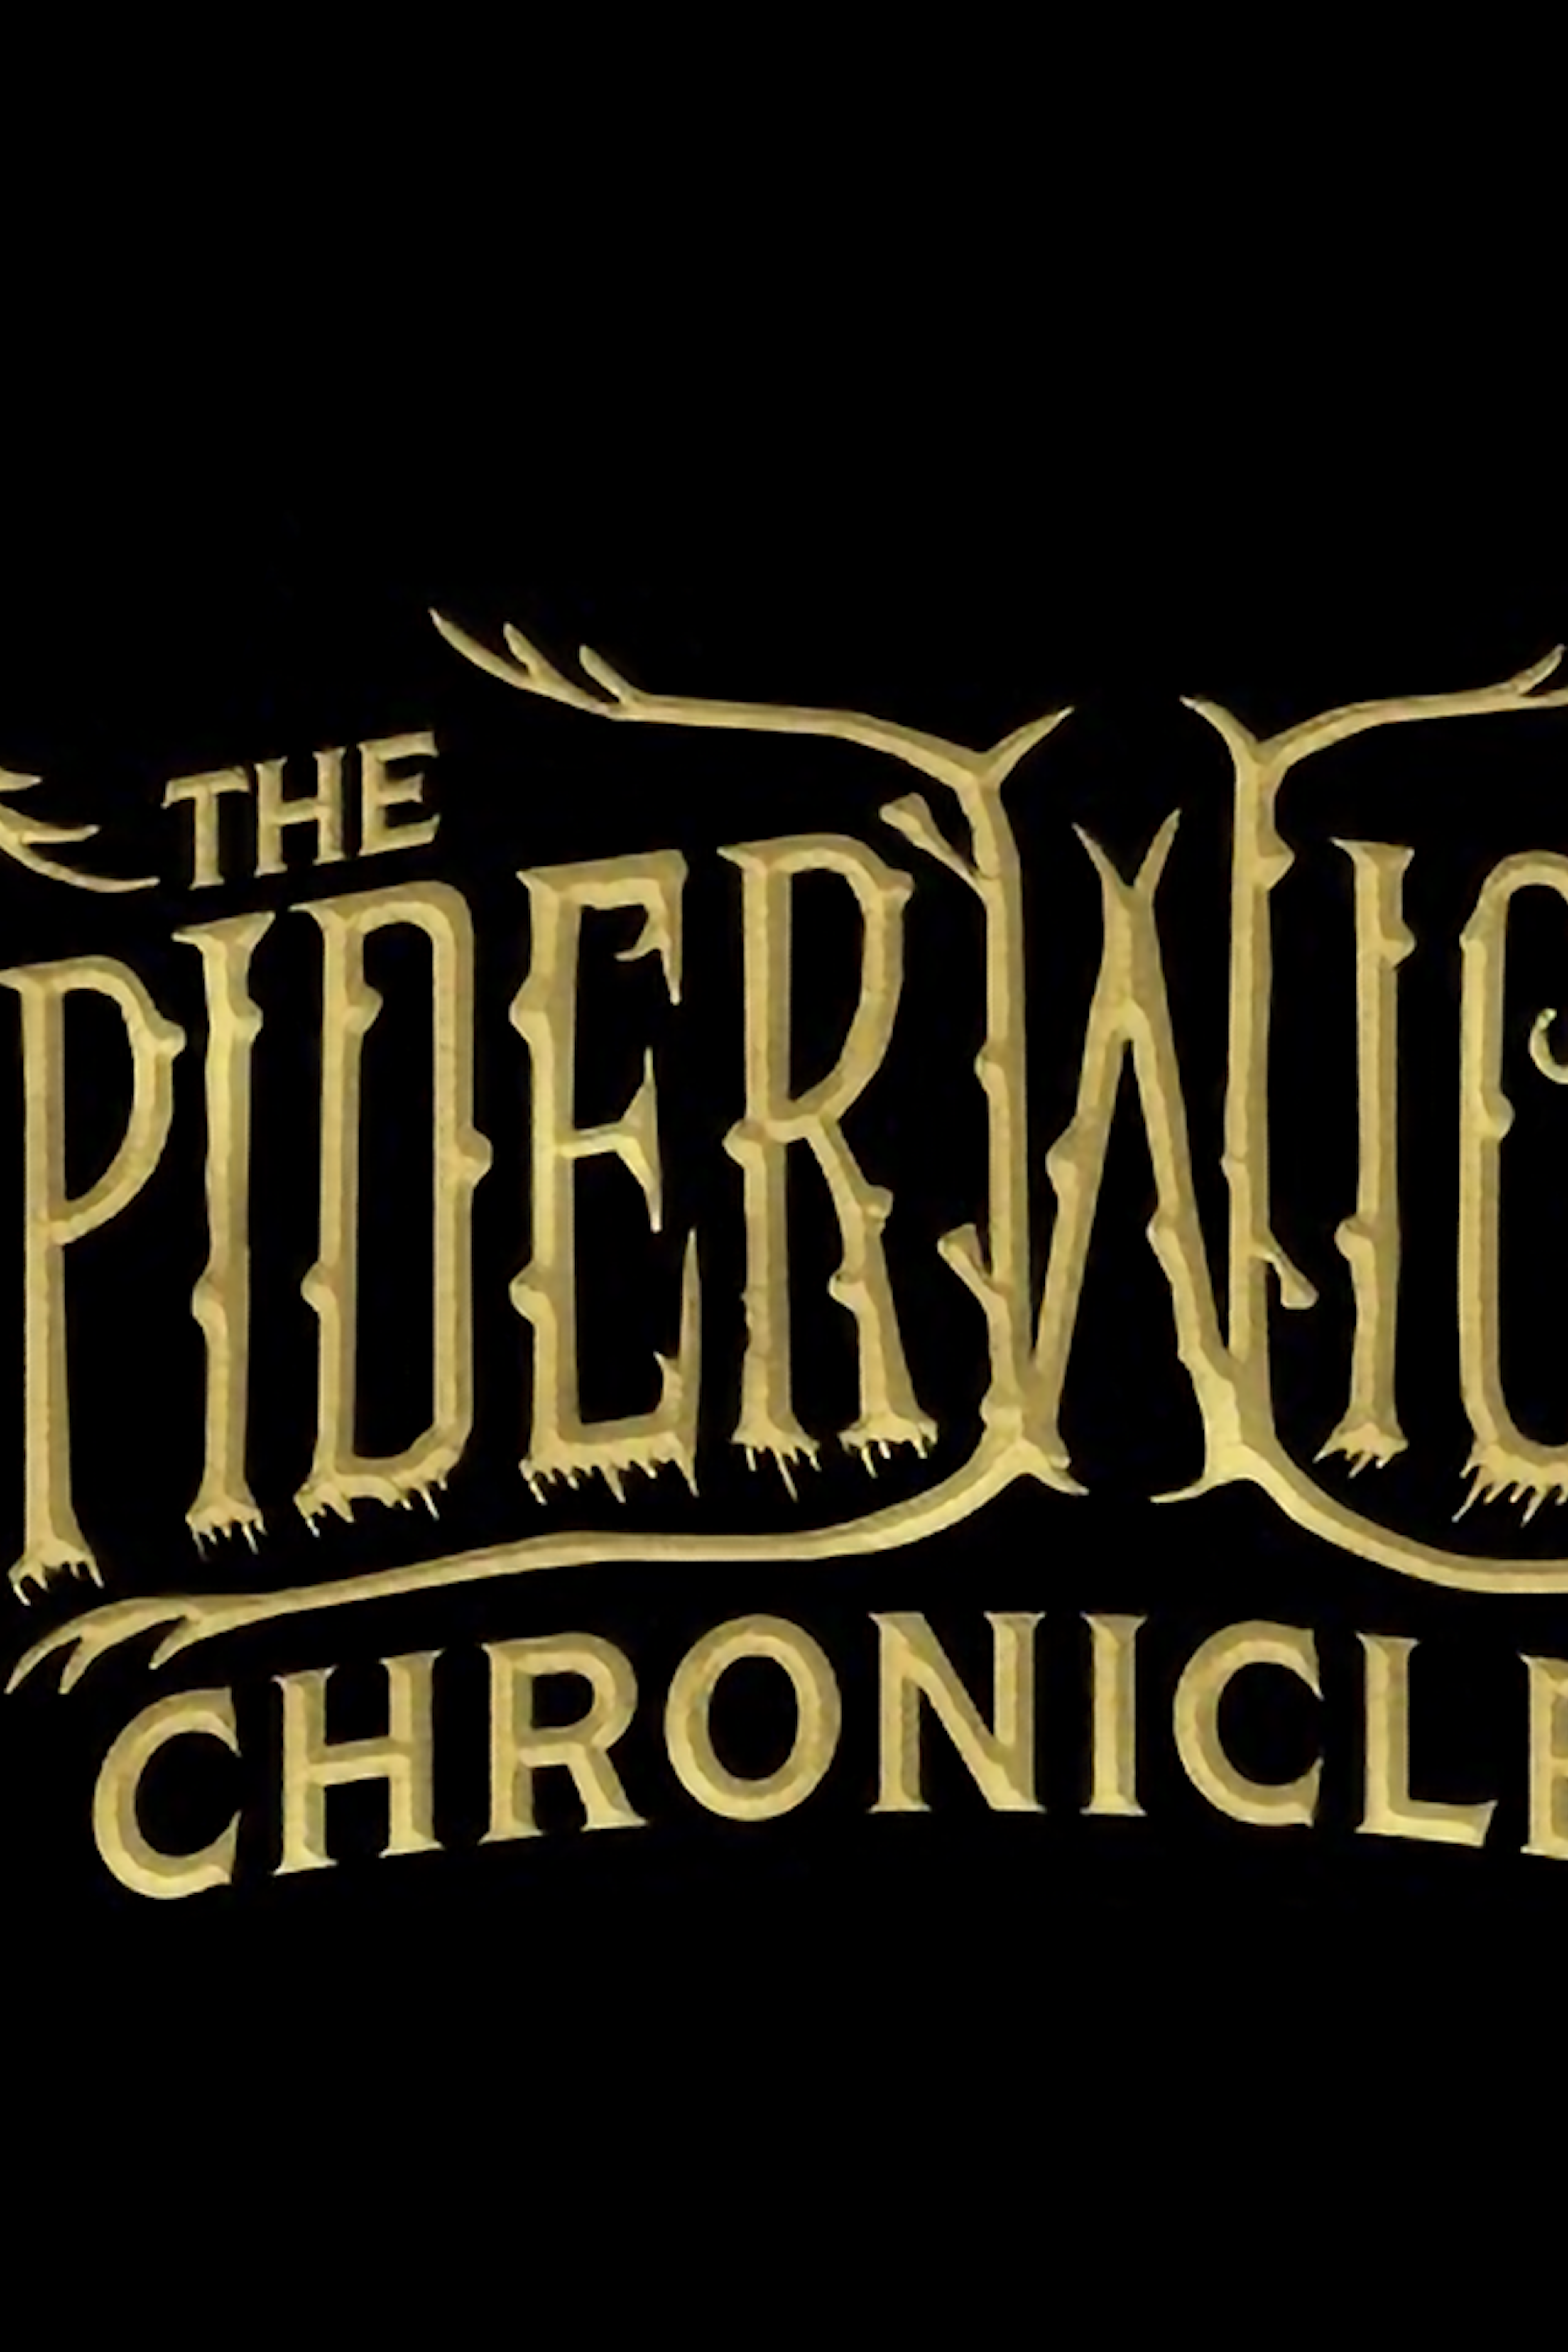 In Production: The Spiderwick Chronicles